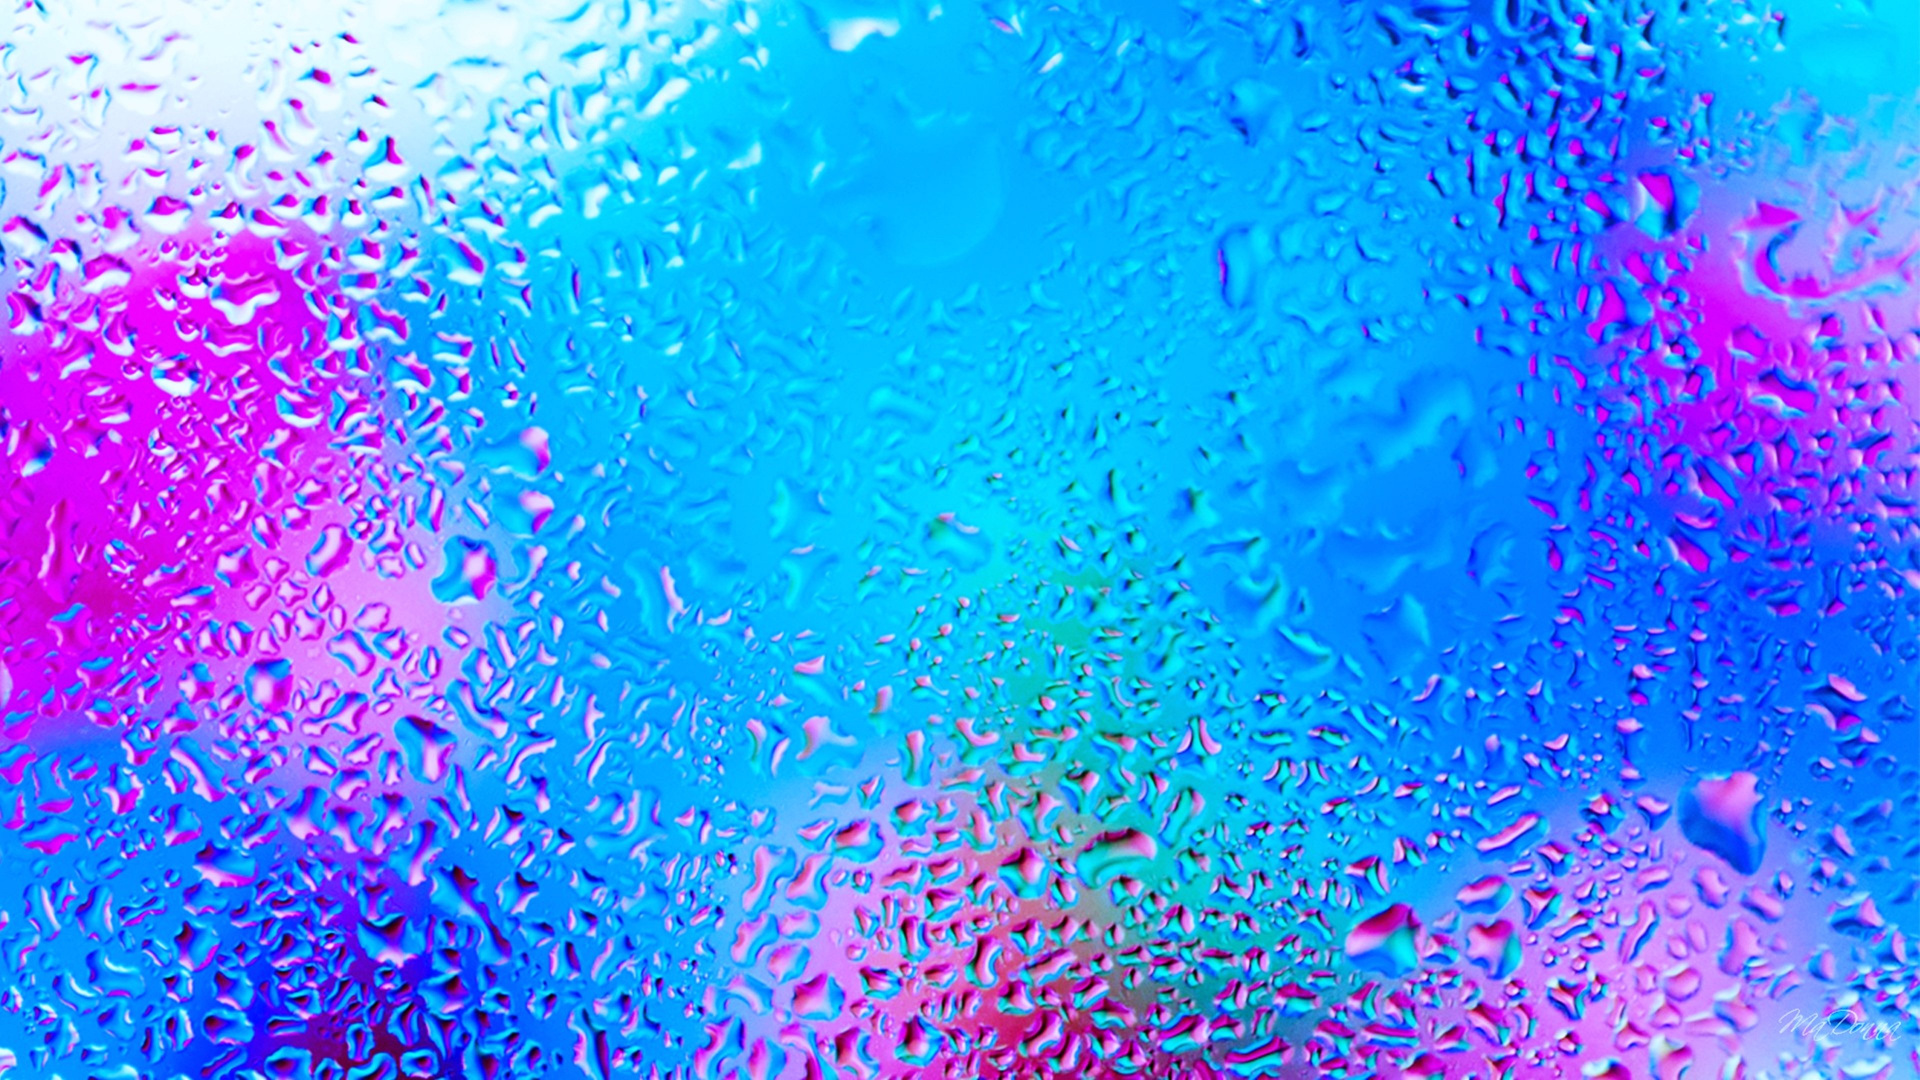 Water Droplets on Glass During Daytime. Wallpaper in 1920x1080 Resolution